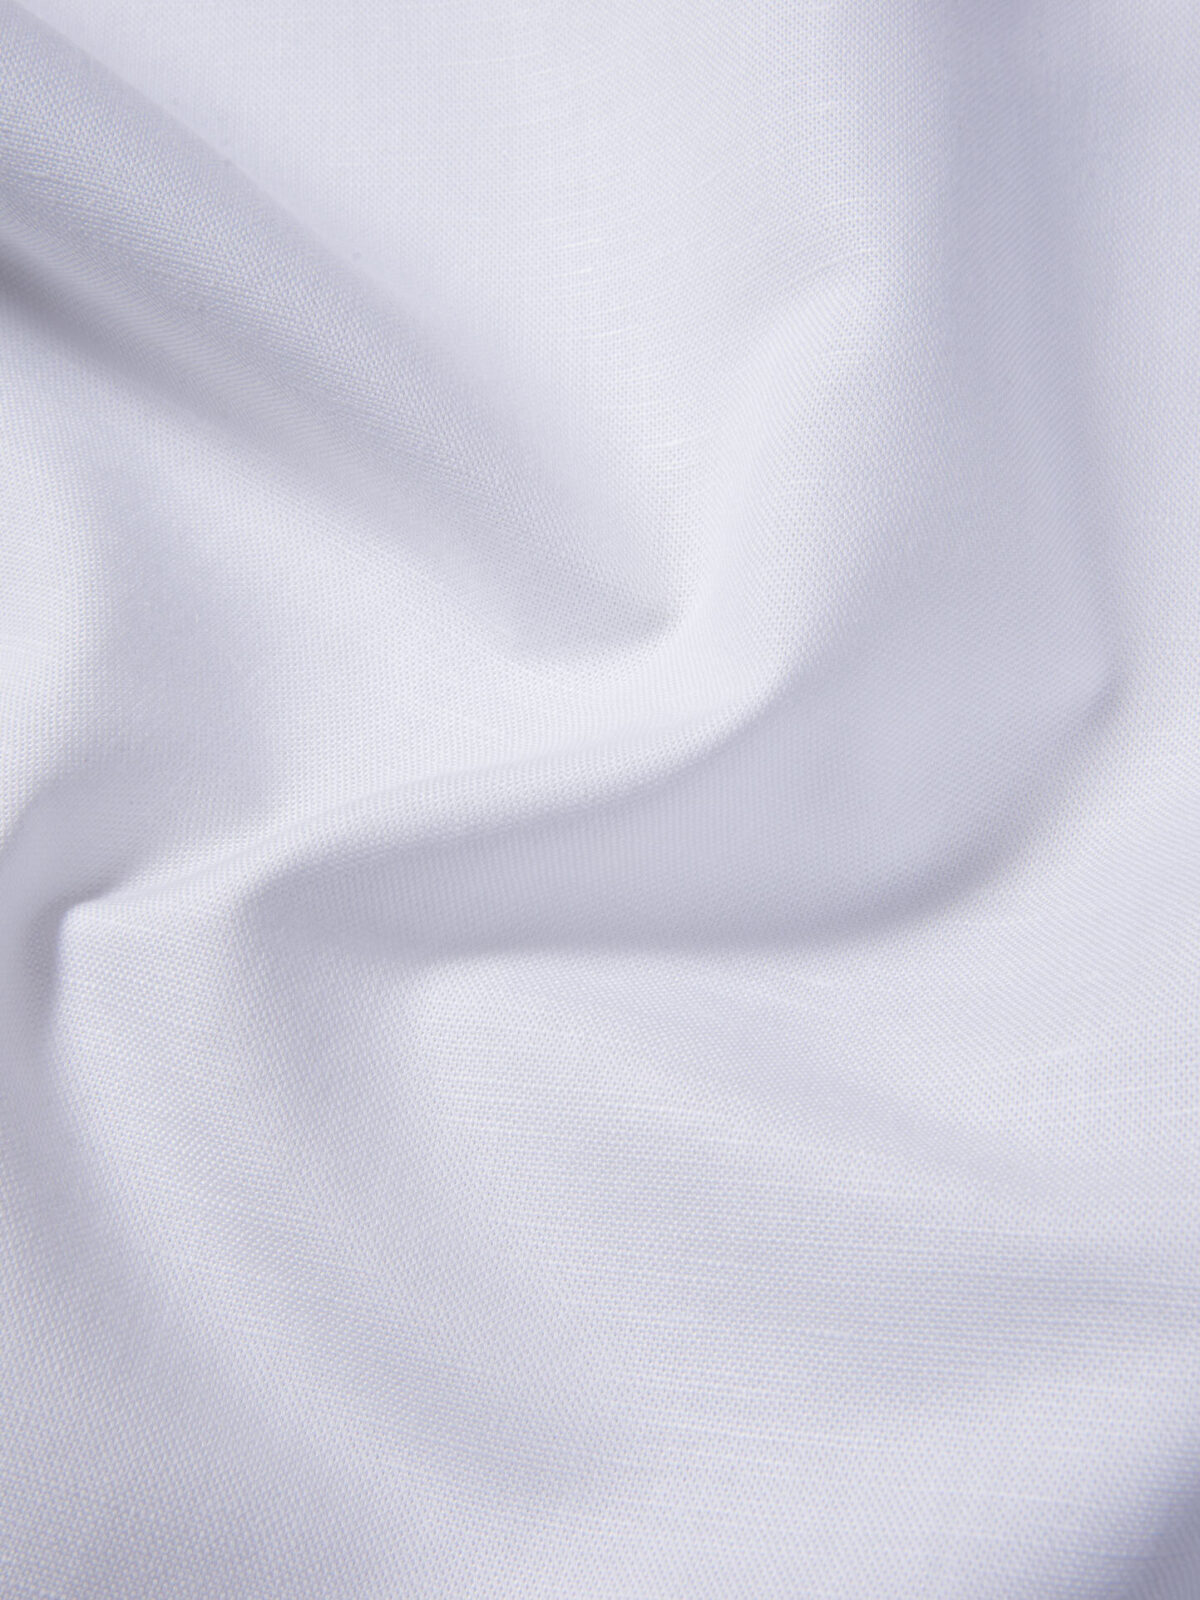 Portuguese White Cotton and Linen Oxford Shirts by Proper Cloth